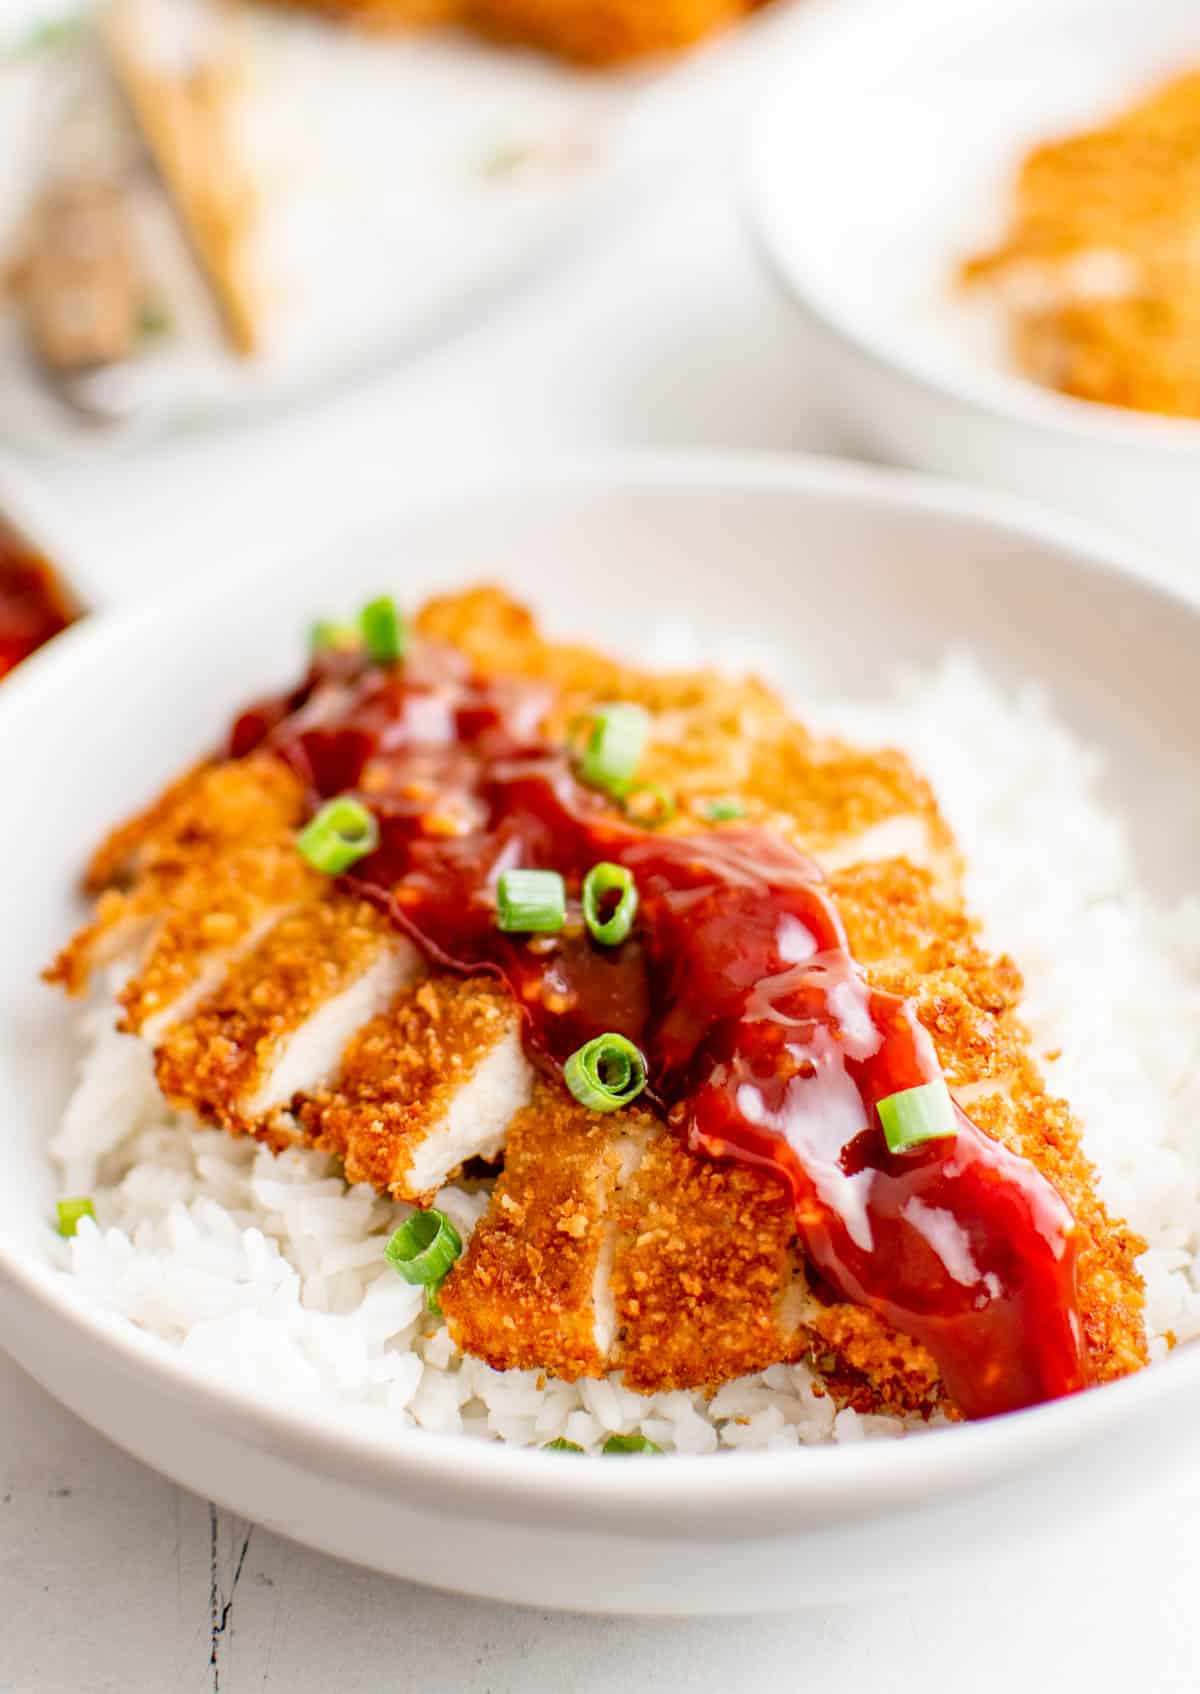 Cut up Chicken Katsu Recipe in bowl over rice with sauce.